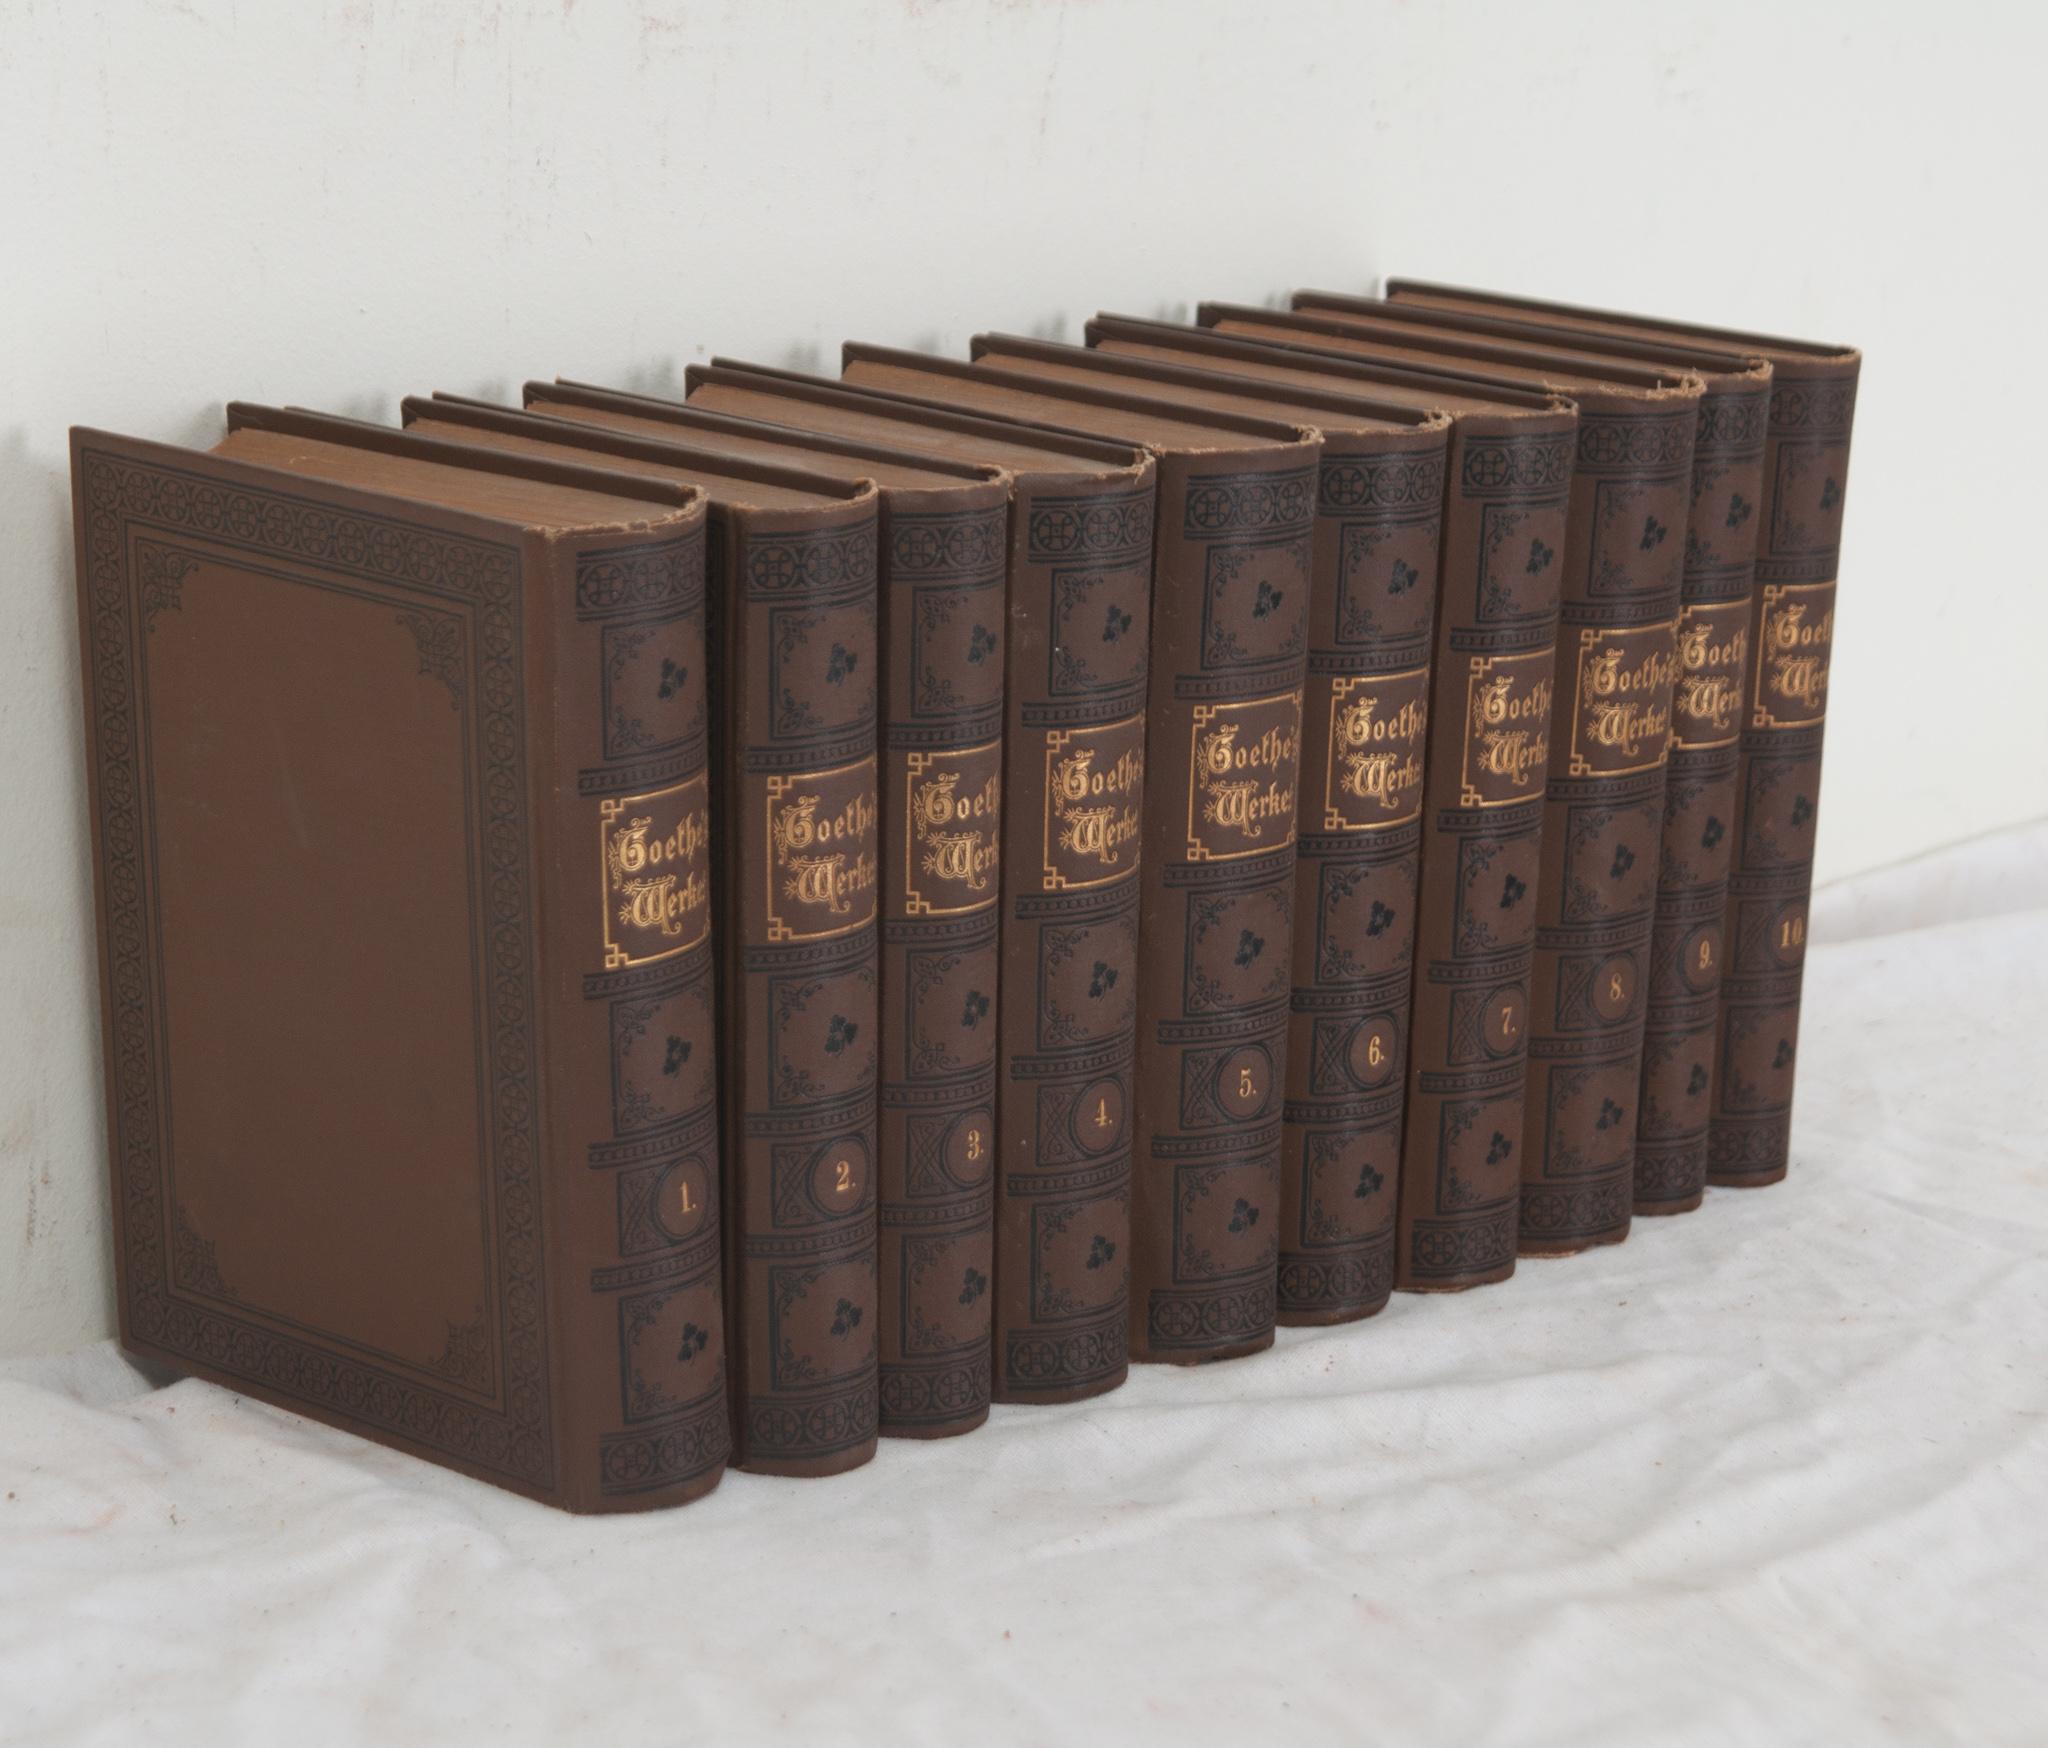 Other Set of 10 Books by German Poet Johann Wolfgang Von Goethe For Sale